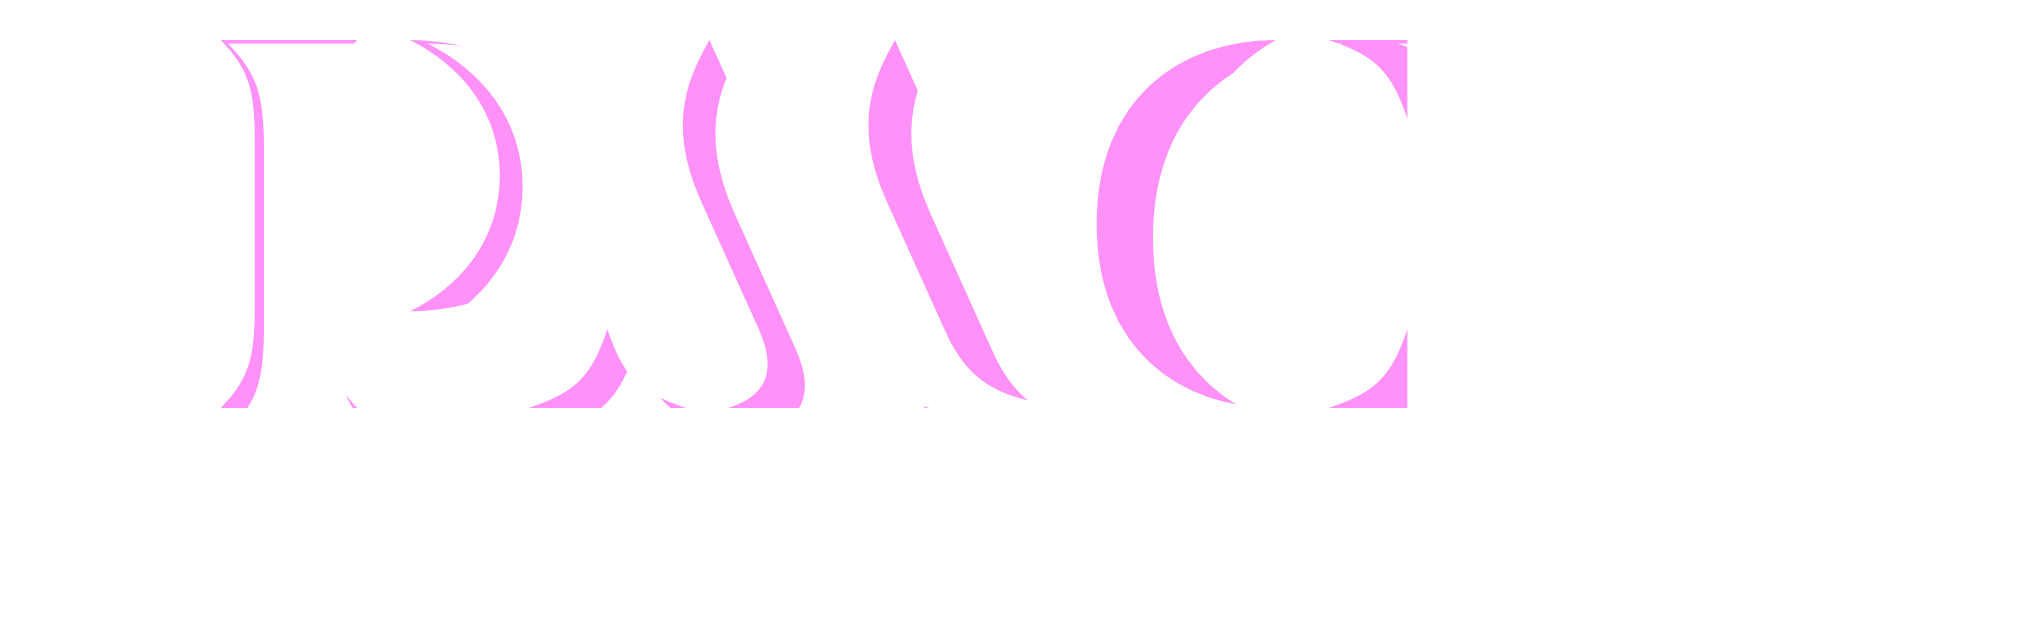 Prolific Management & Consulting Corporation